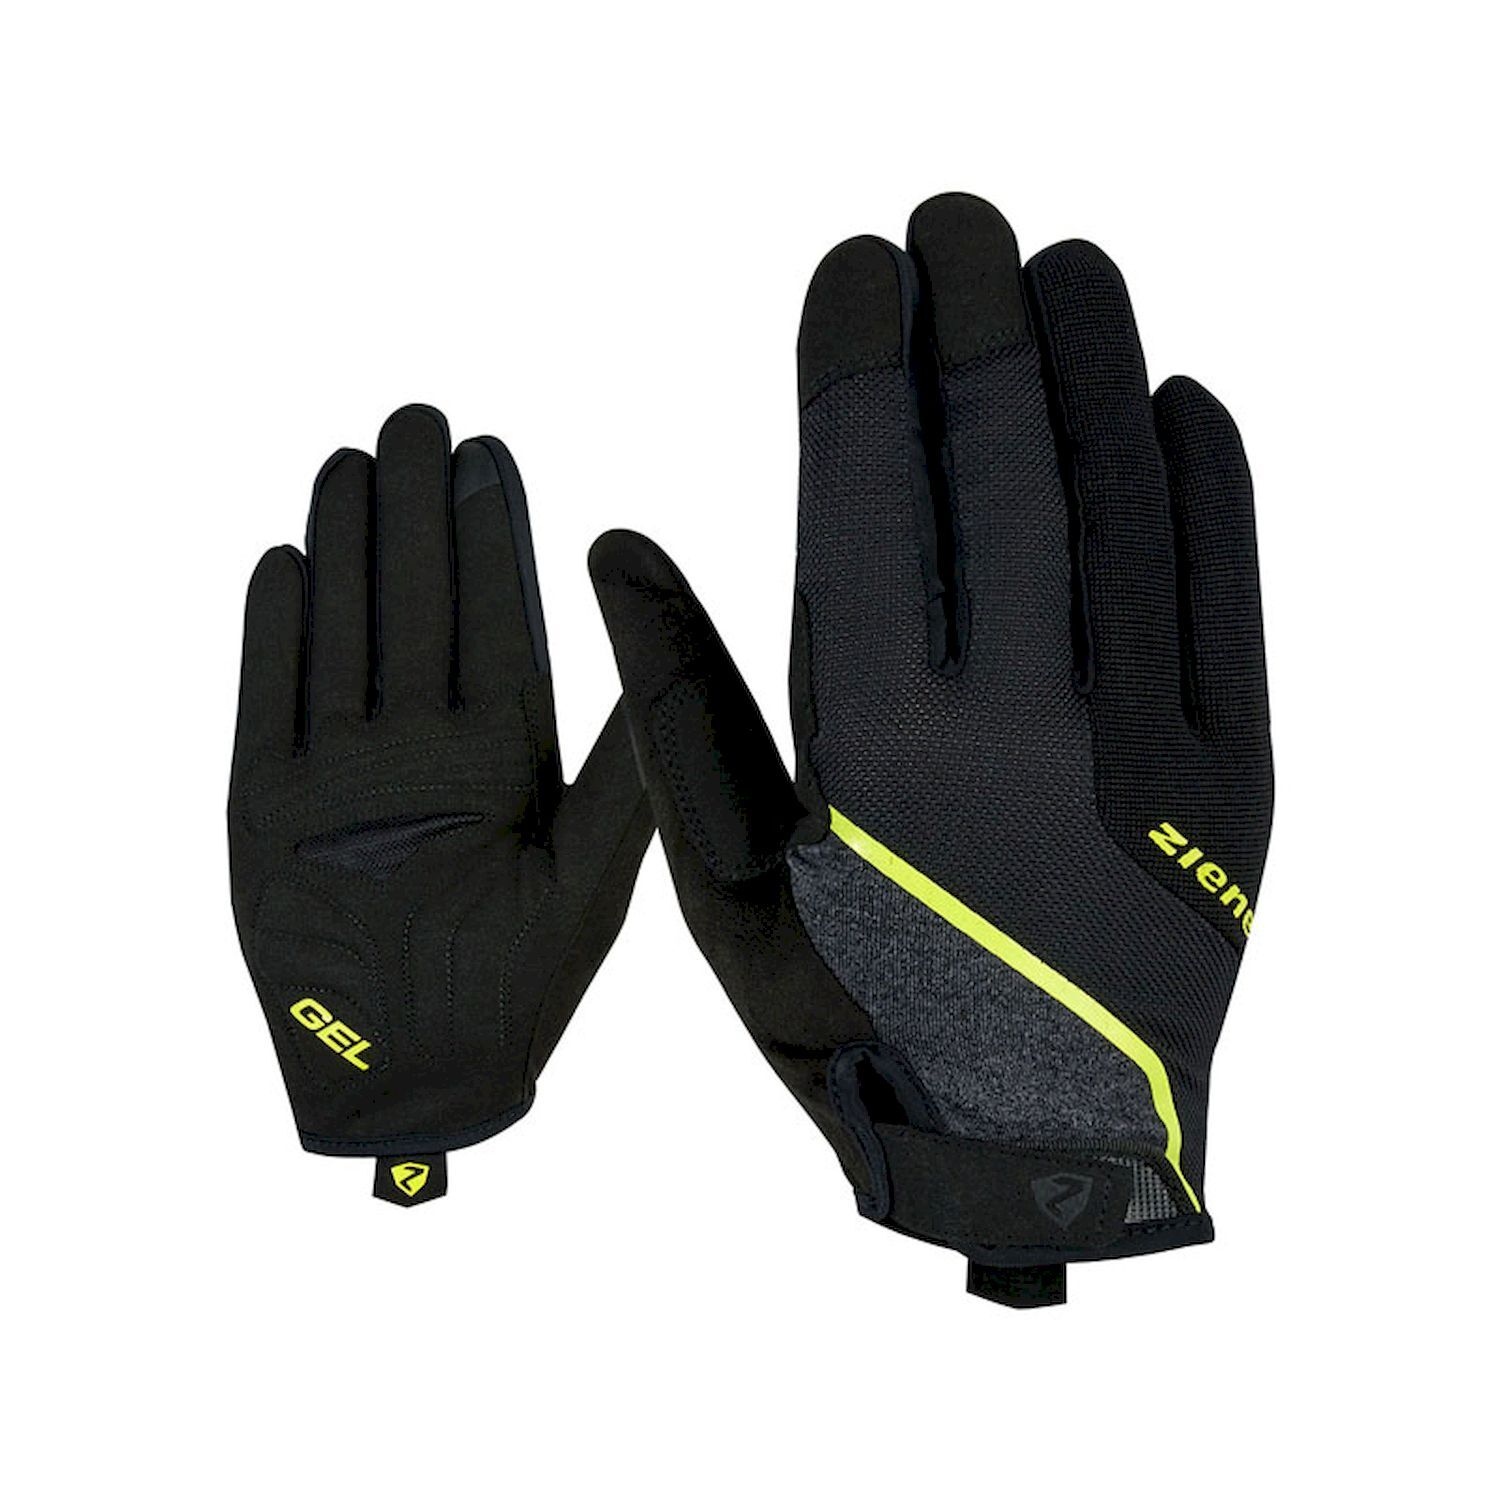 Ziener Clyo Touch Long - Guantes ciclismo - Hombre